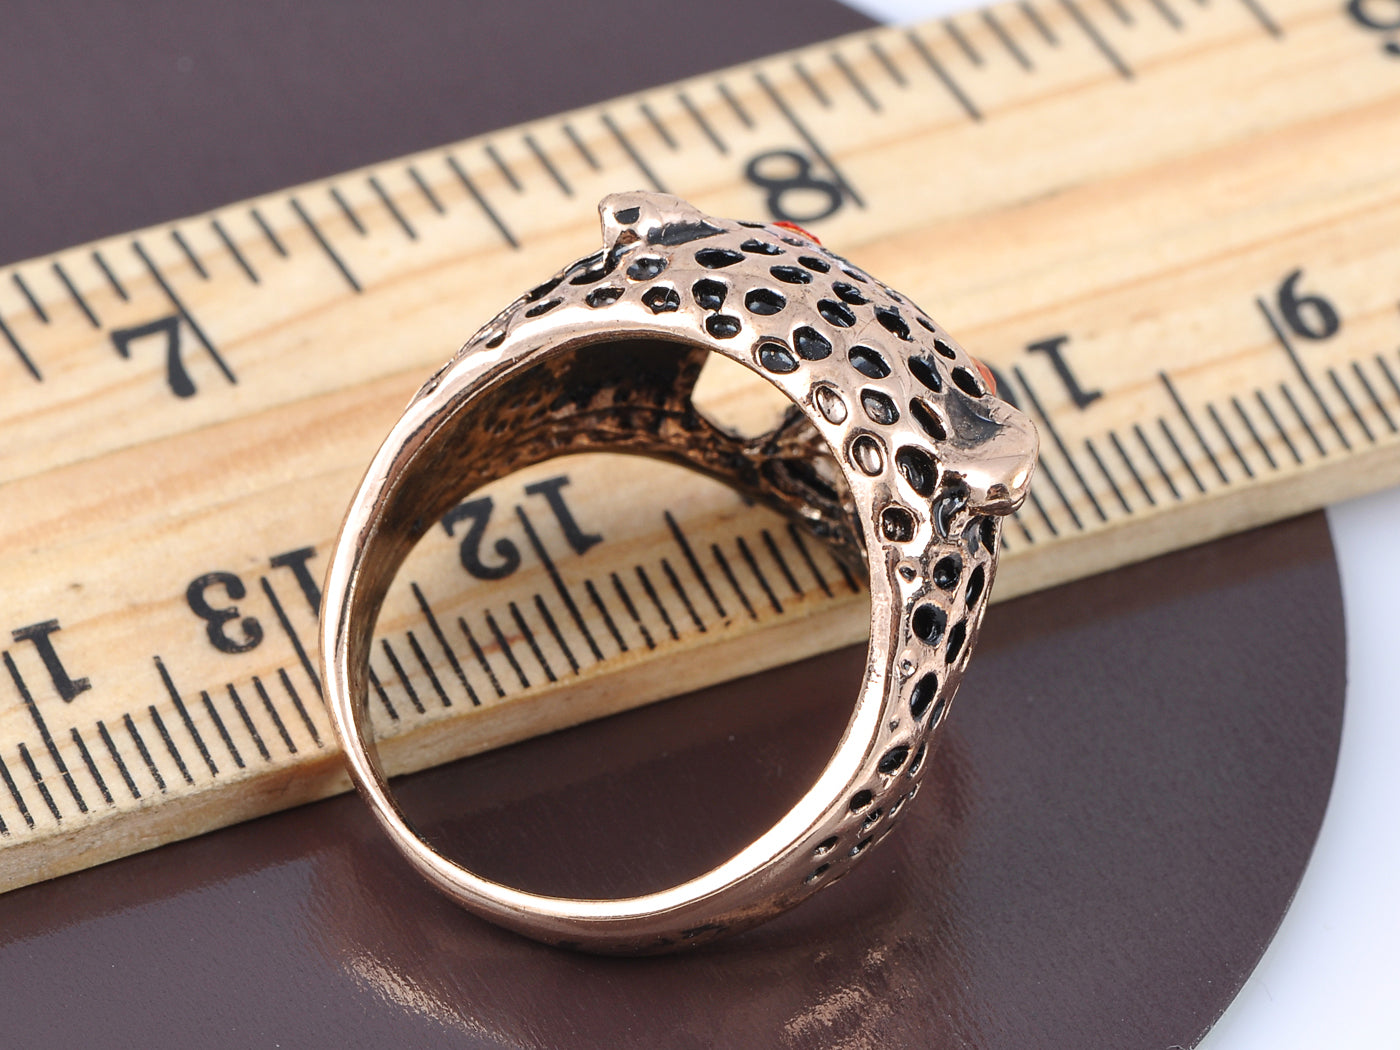 Fierce Red Eyed Jaguar Cougar Angry Spot Animal Sized Ring